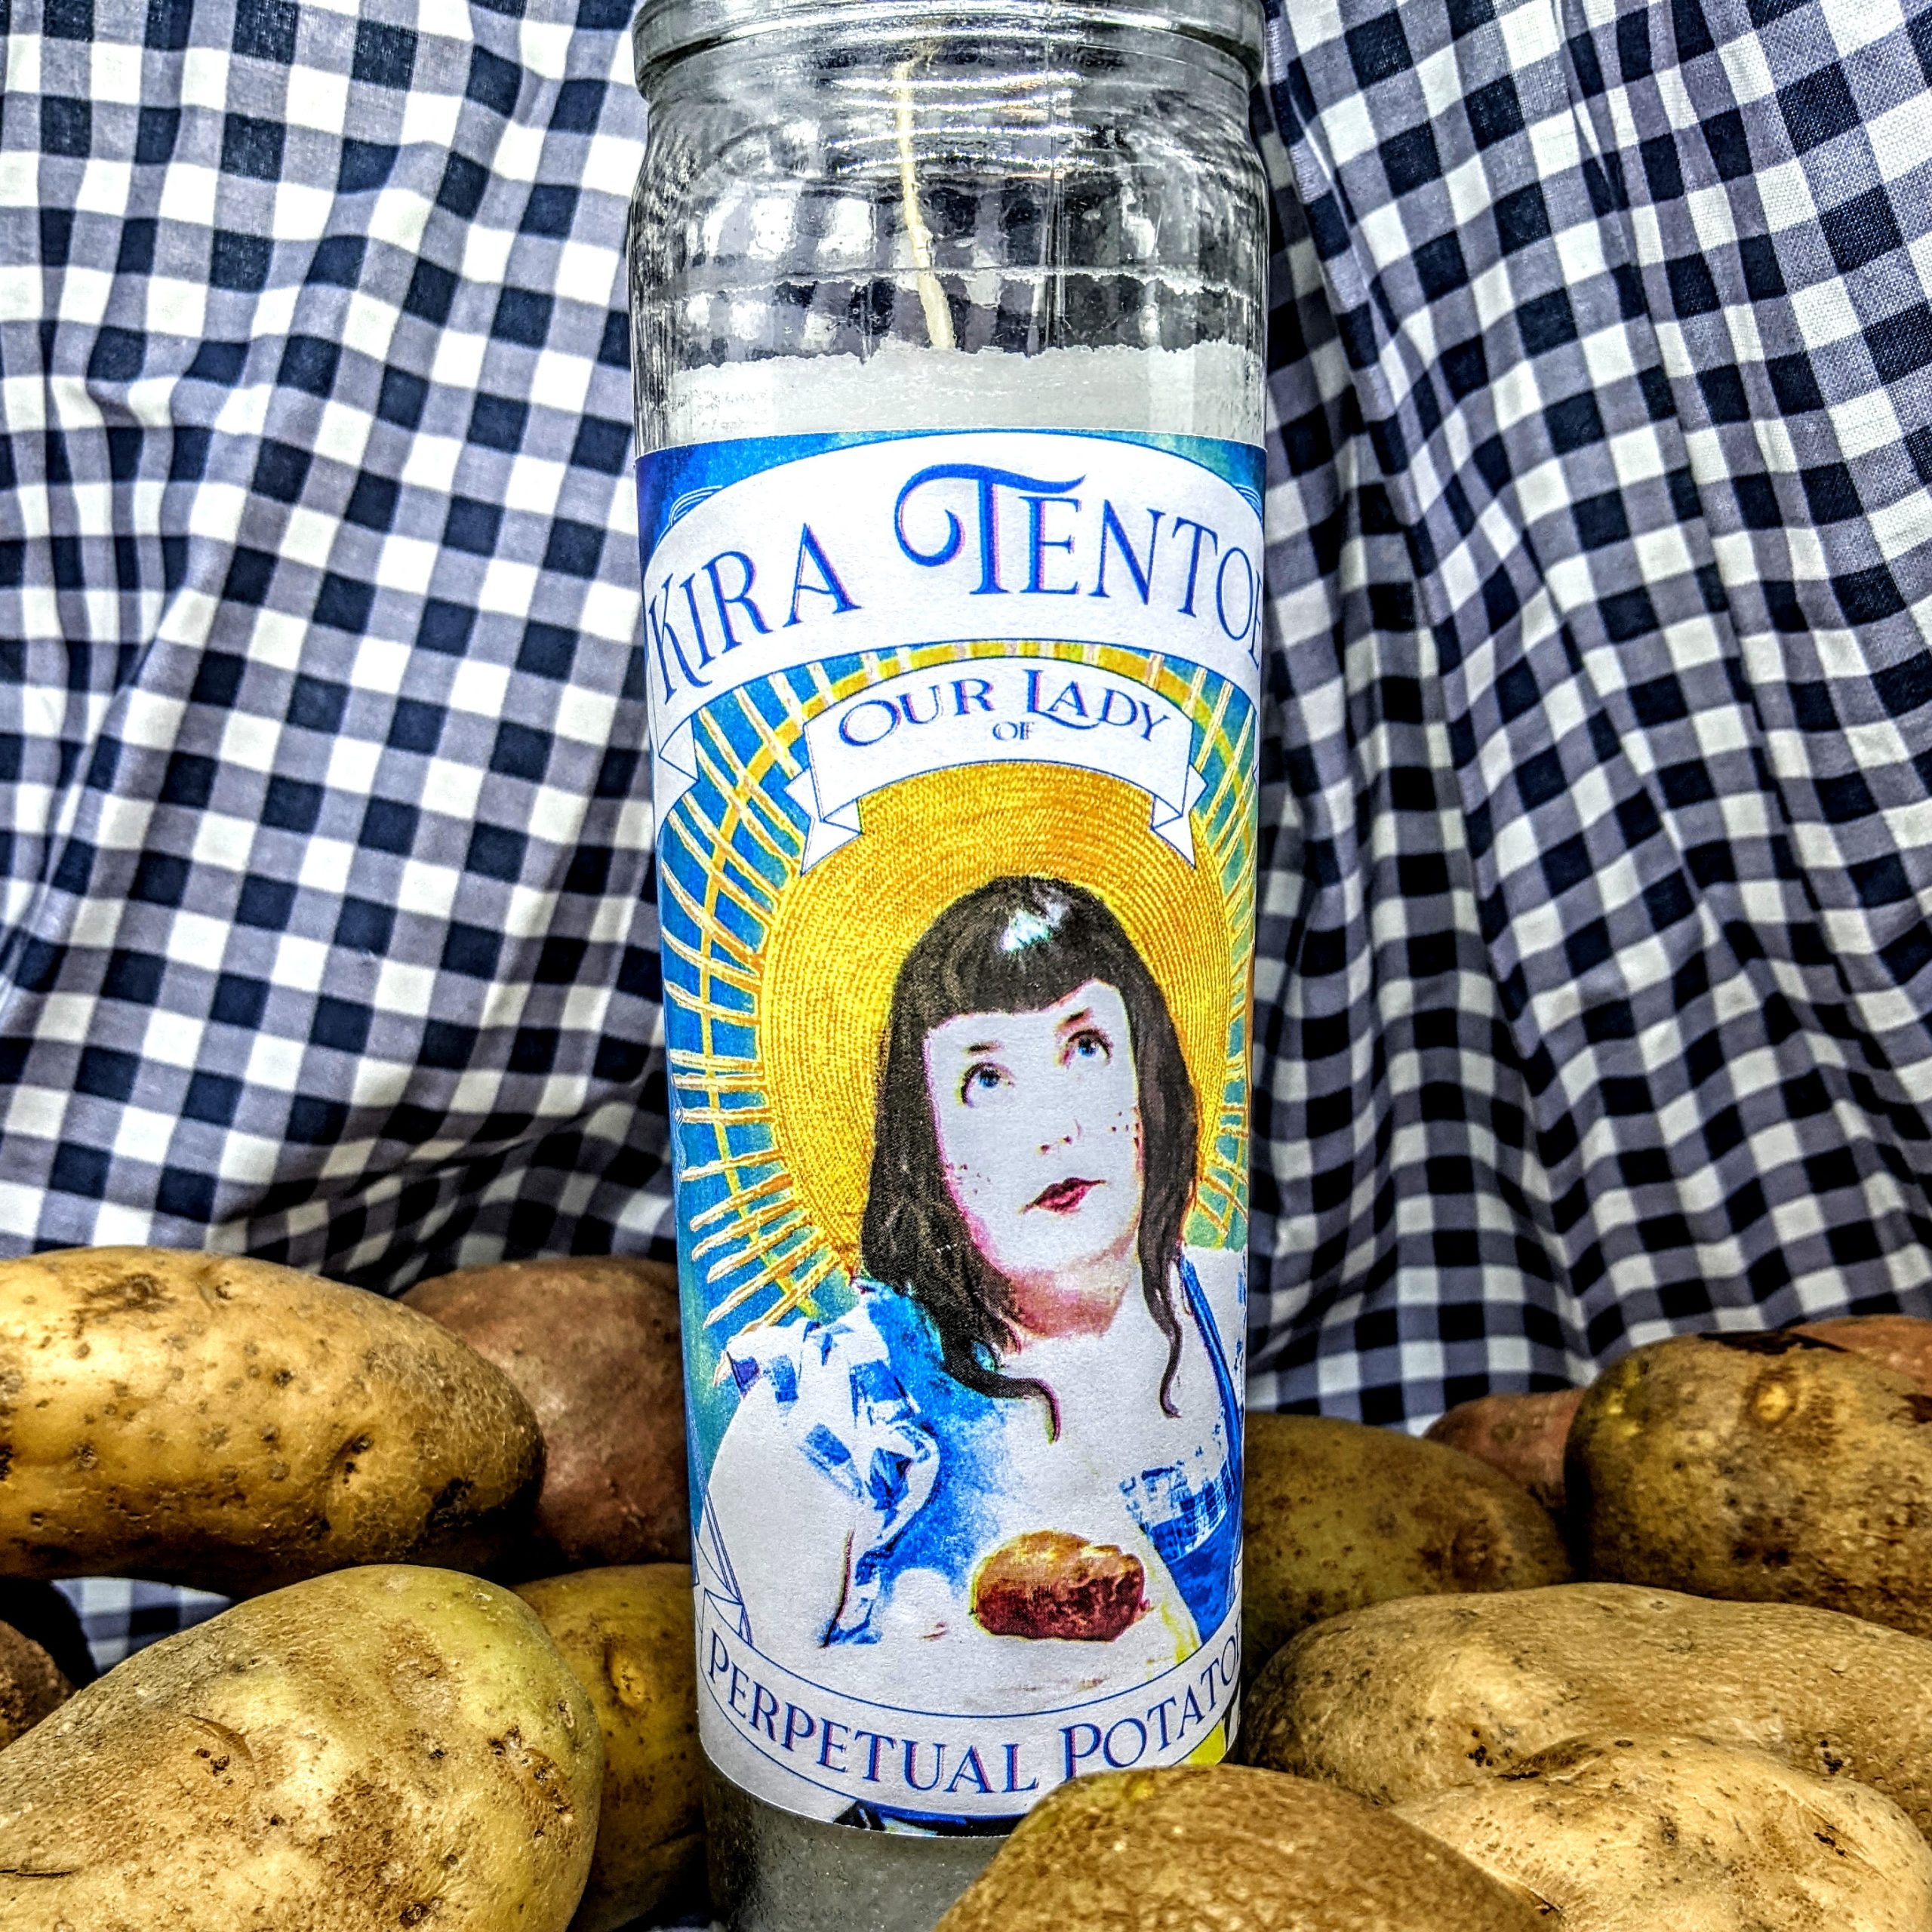 Our Lady of Perpetual Potatoes Prayer Candle